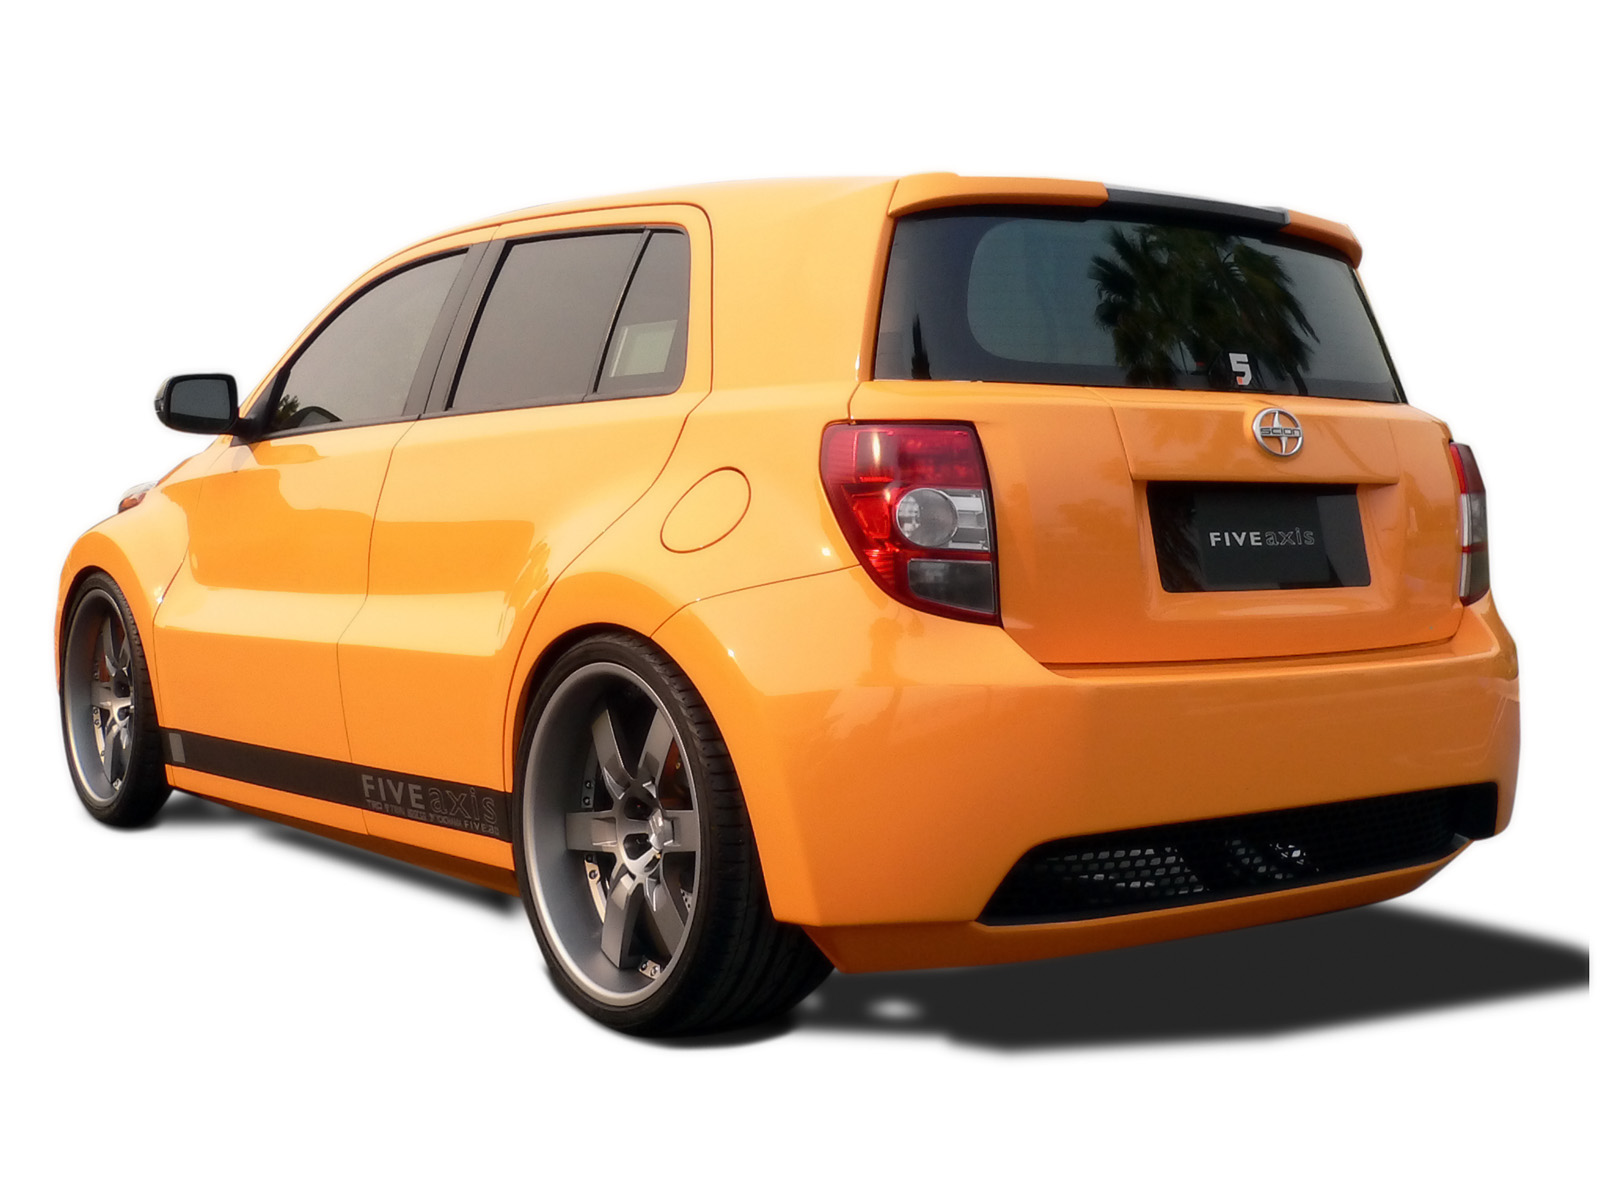 2007 Scion xD Widebody - Rear And Side - 1600x1200 - Wallpaper